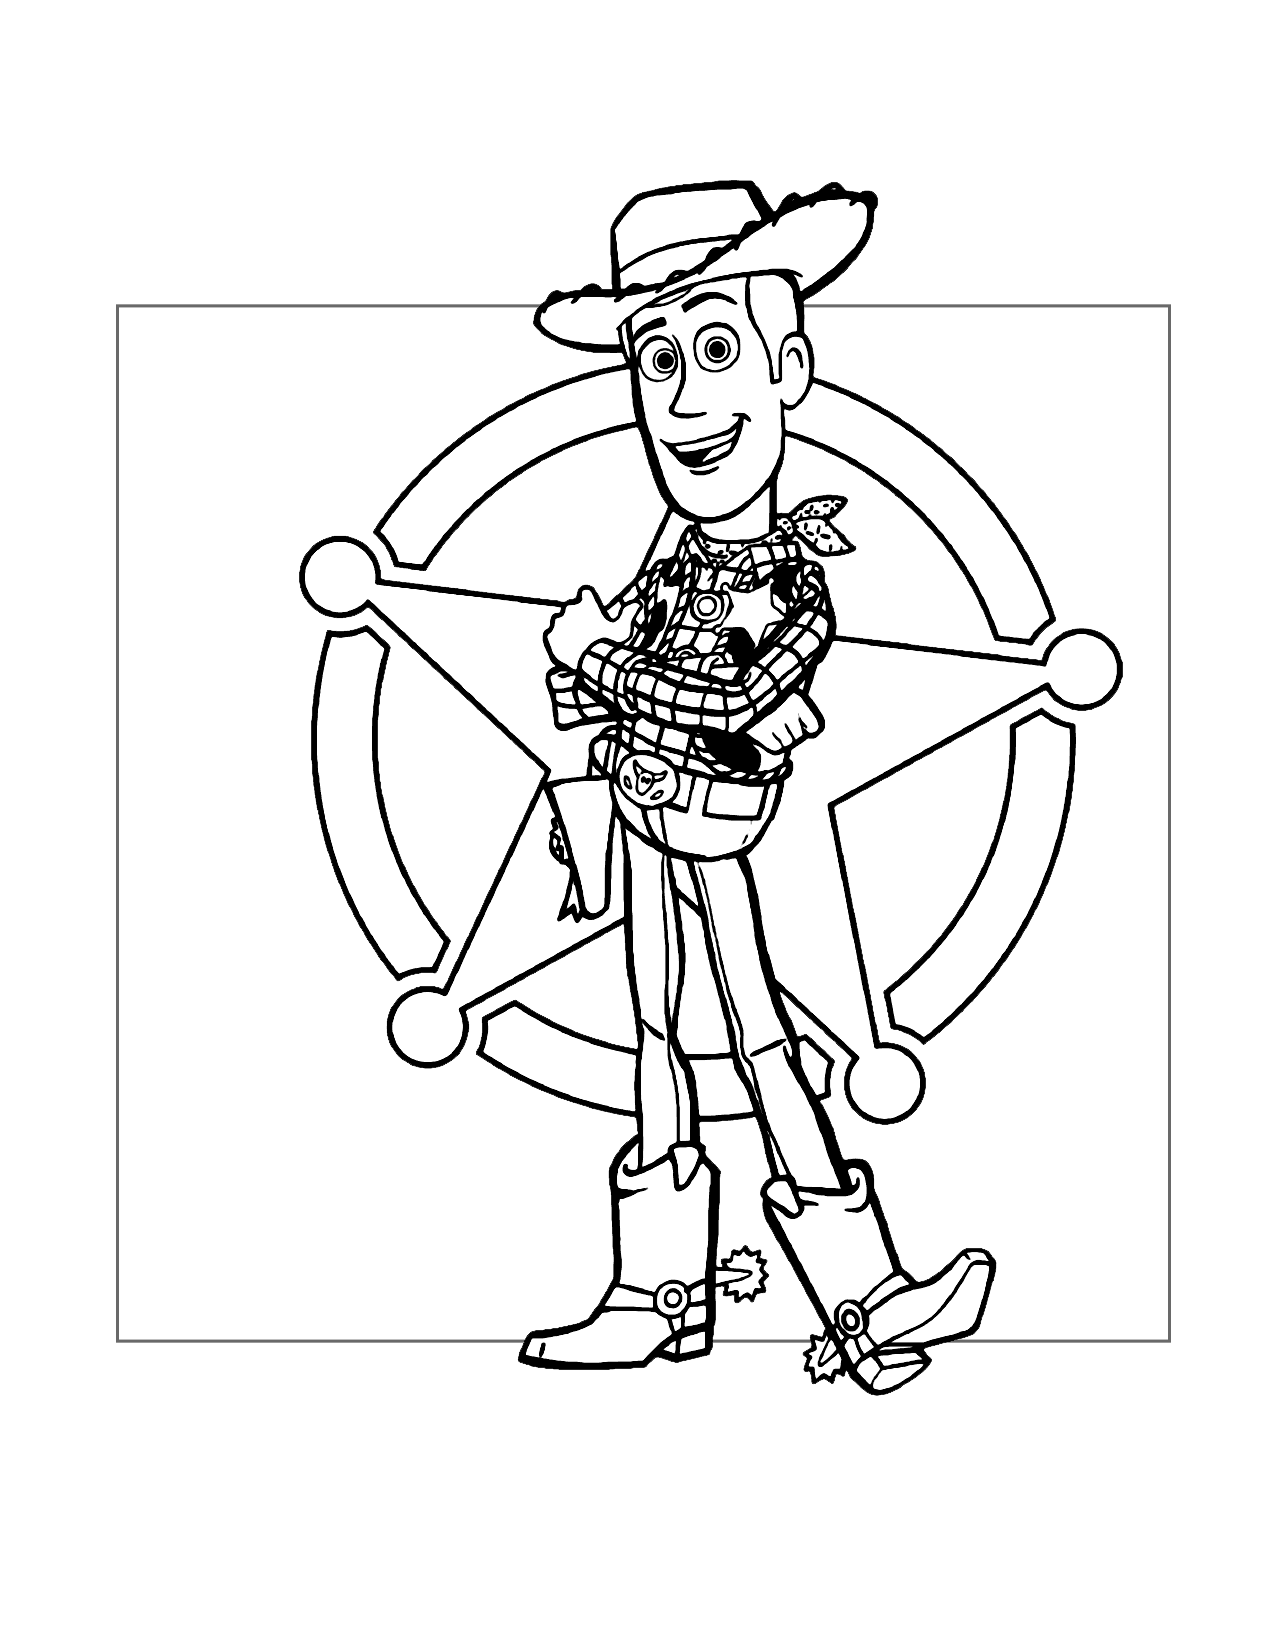 Sheriff Woody Coloring Page